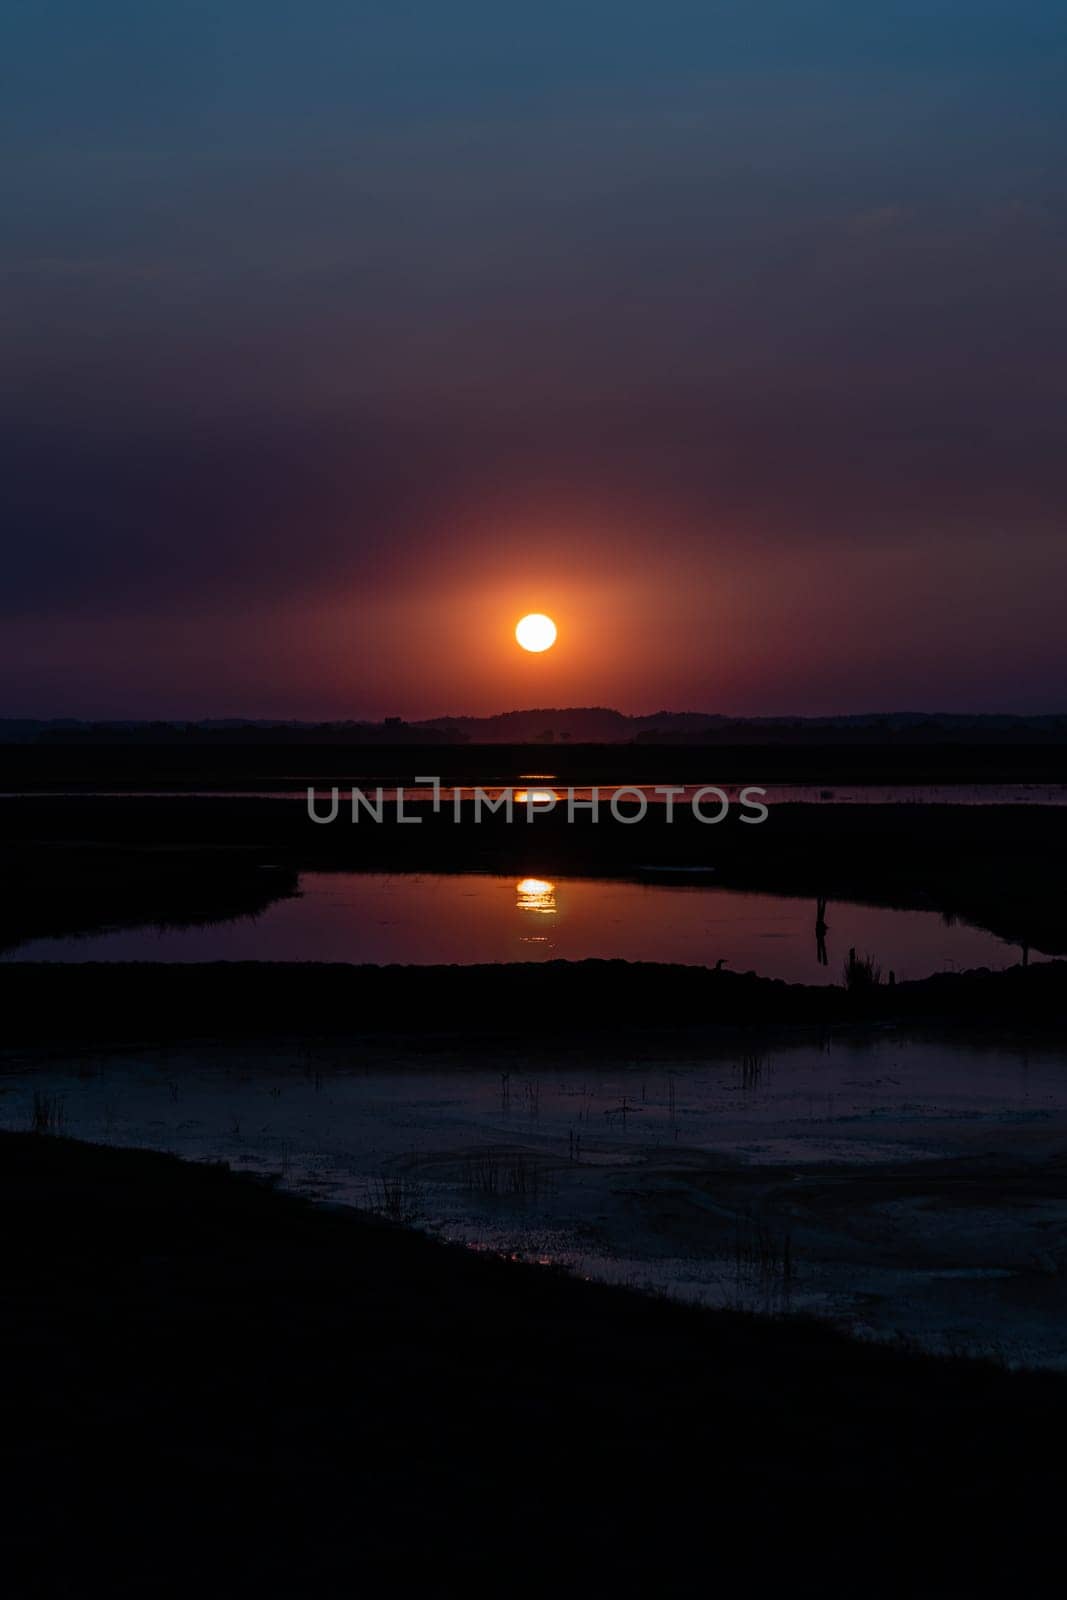 sunset over the lake, End of the afternoon, Nature, Landscape, selective focus